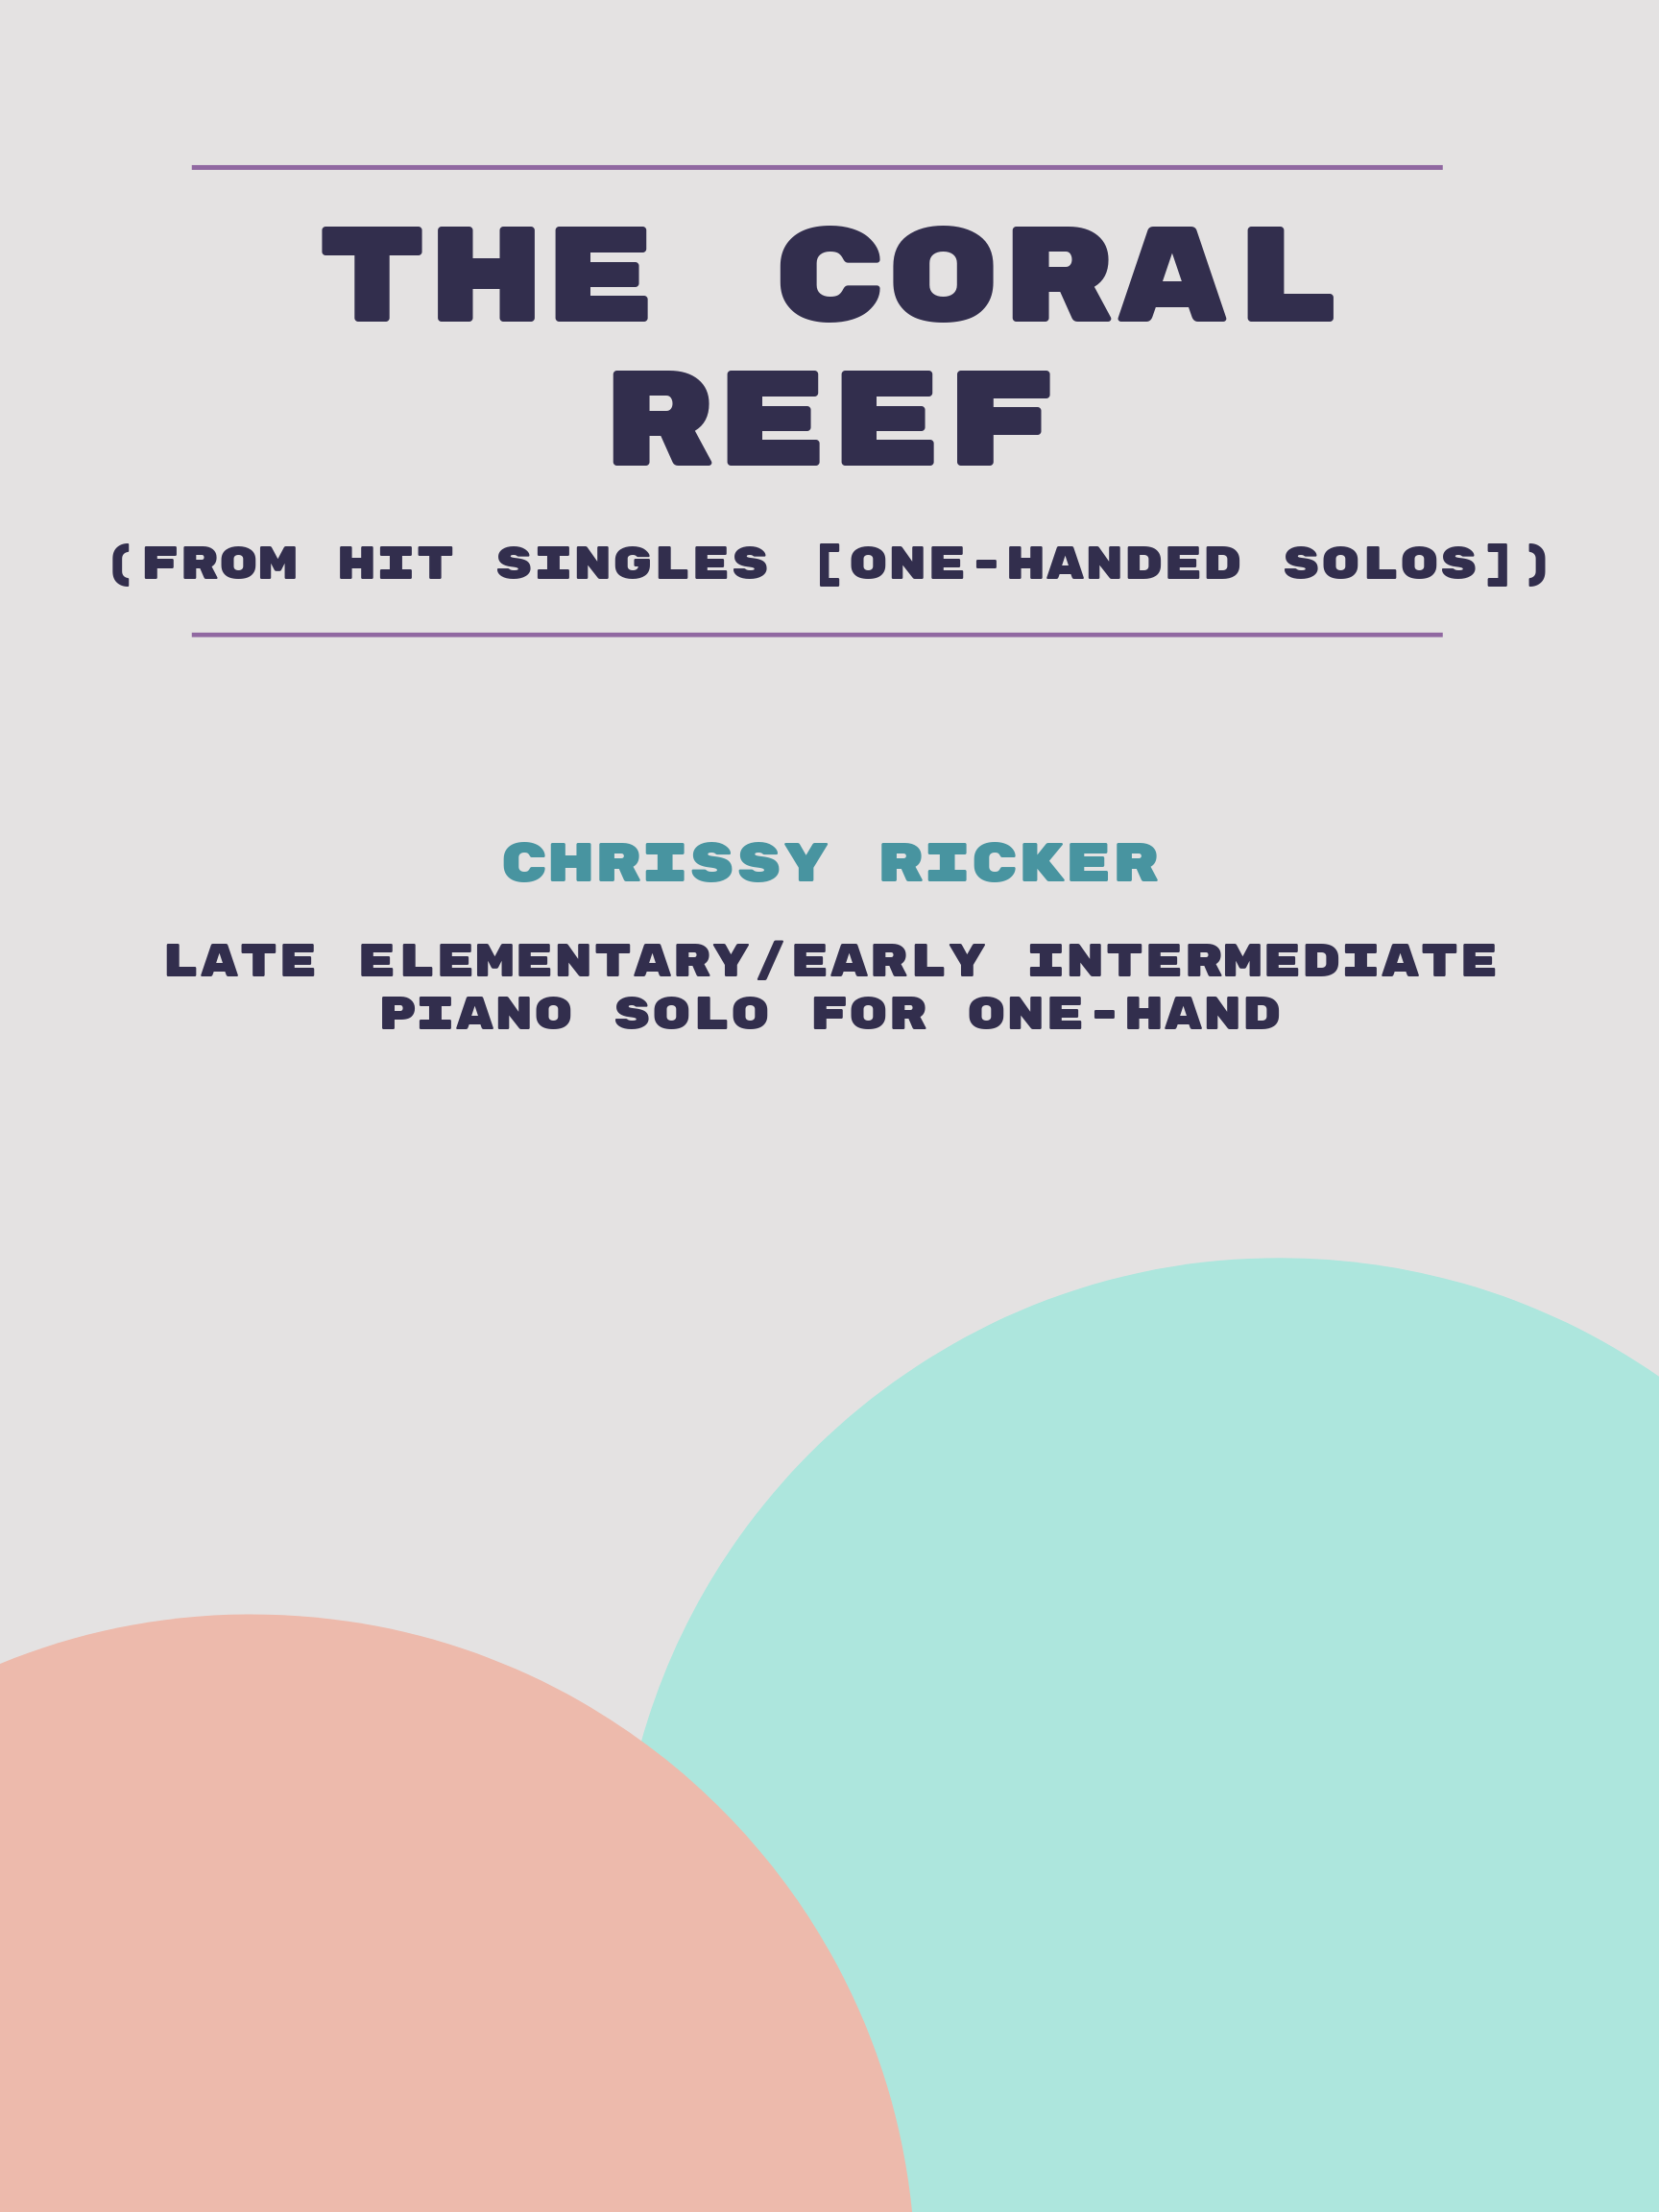 The Coral Reef by Chrissy Ricker